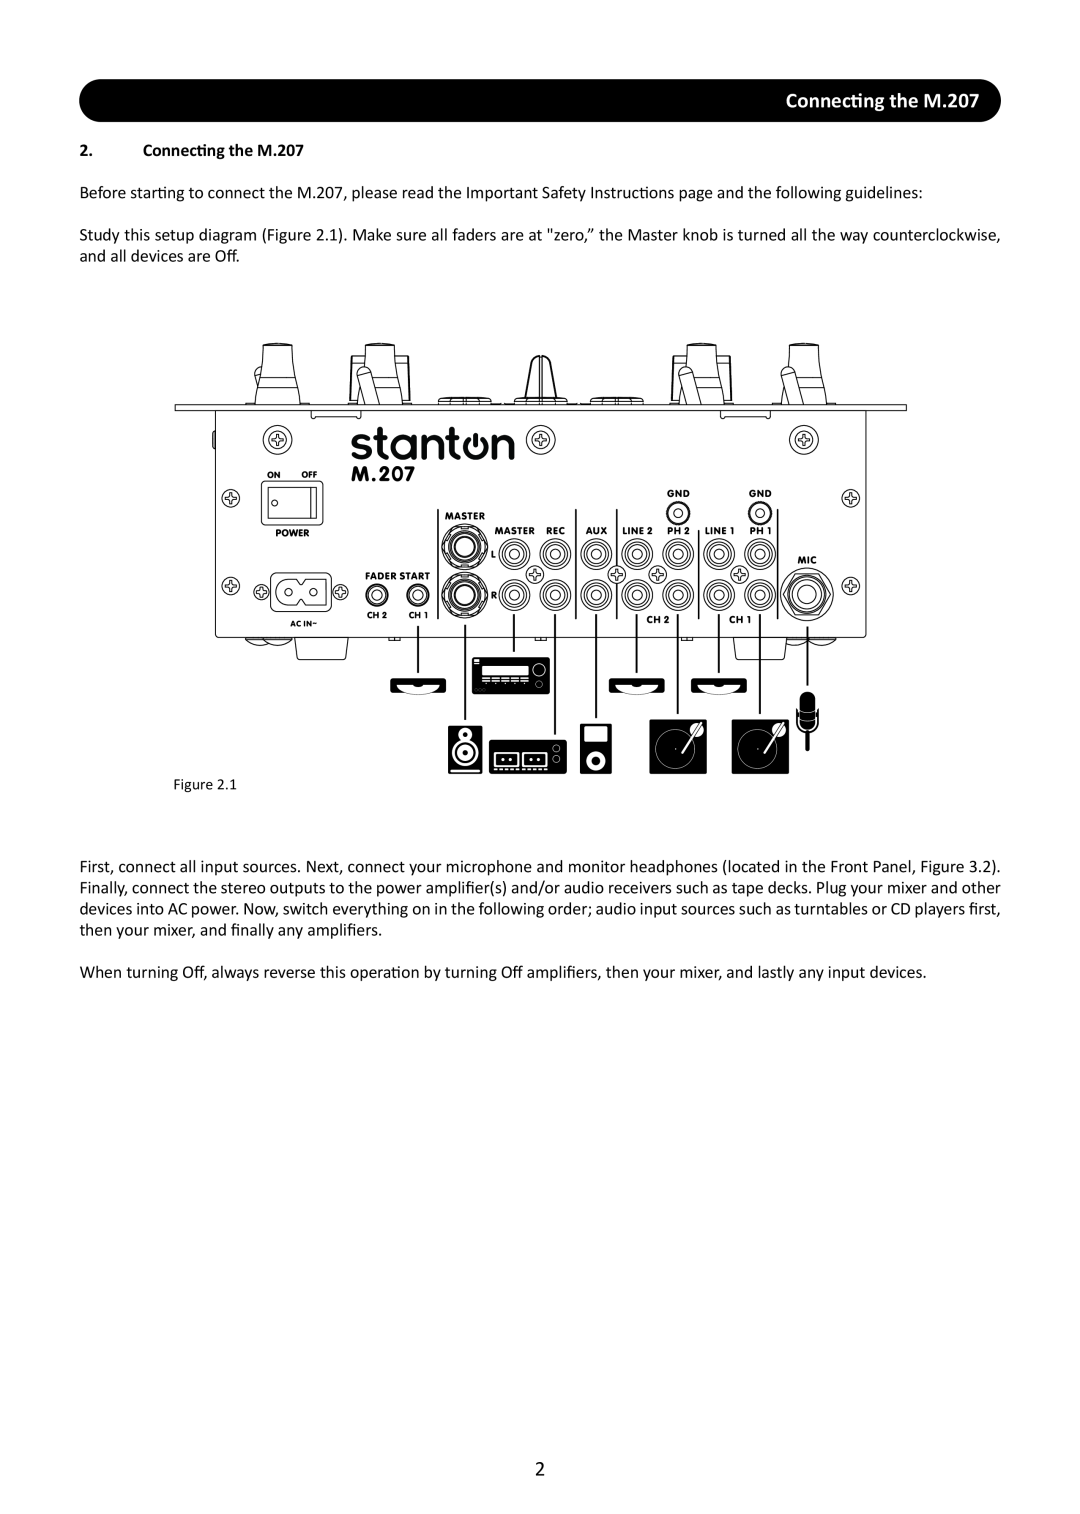 Stanton user manual Connecting the M.207 